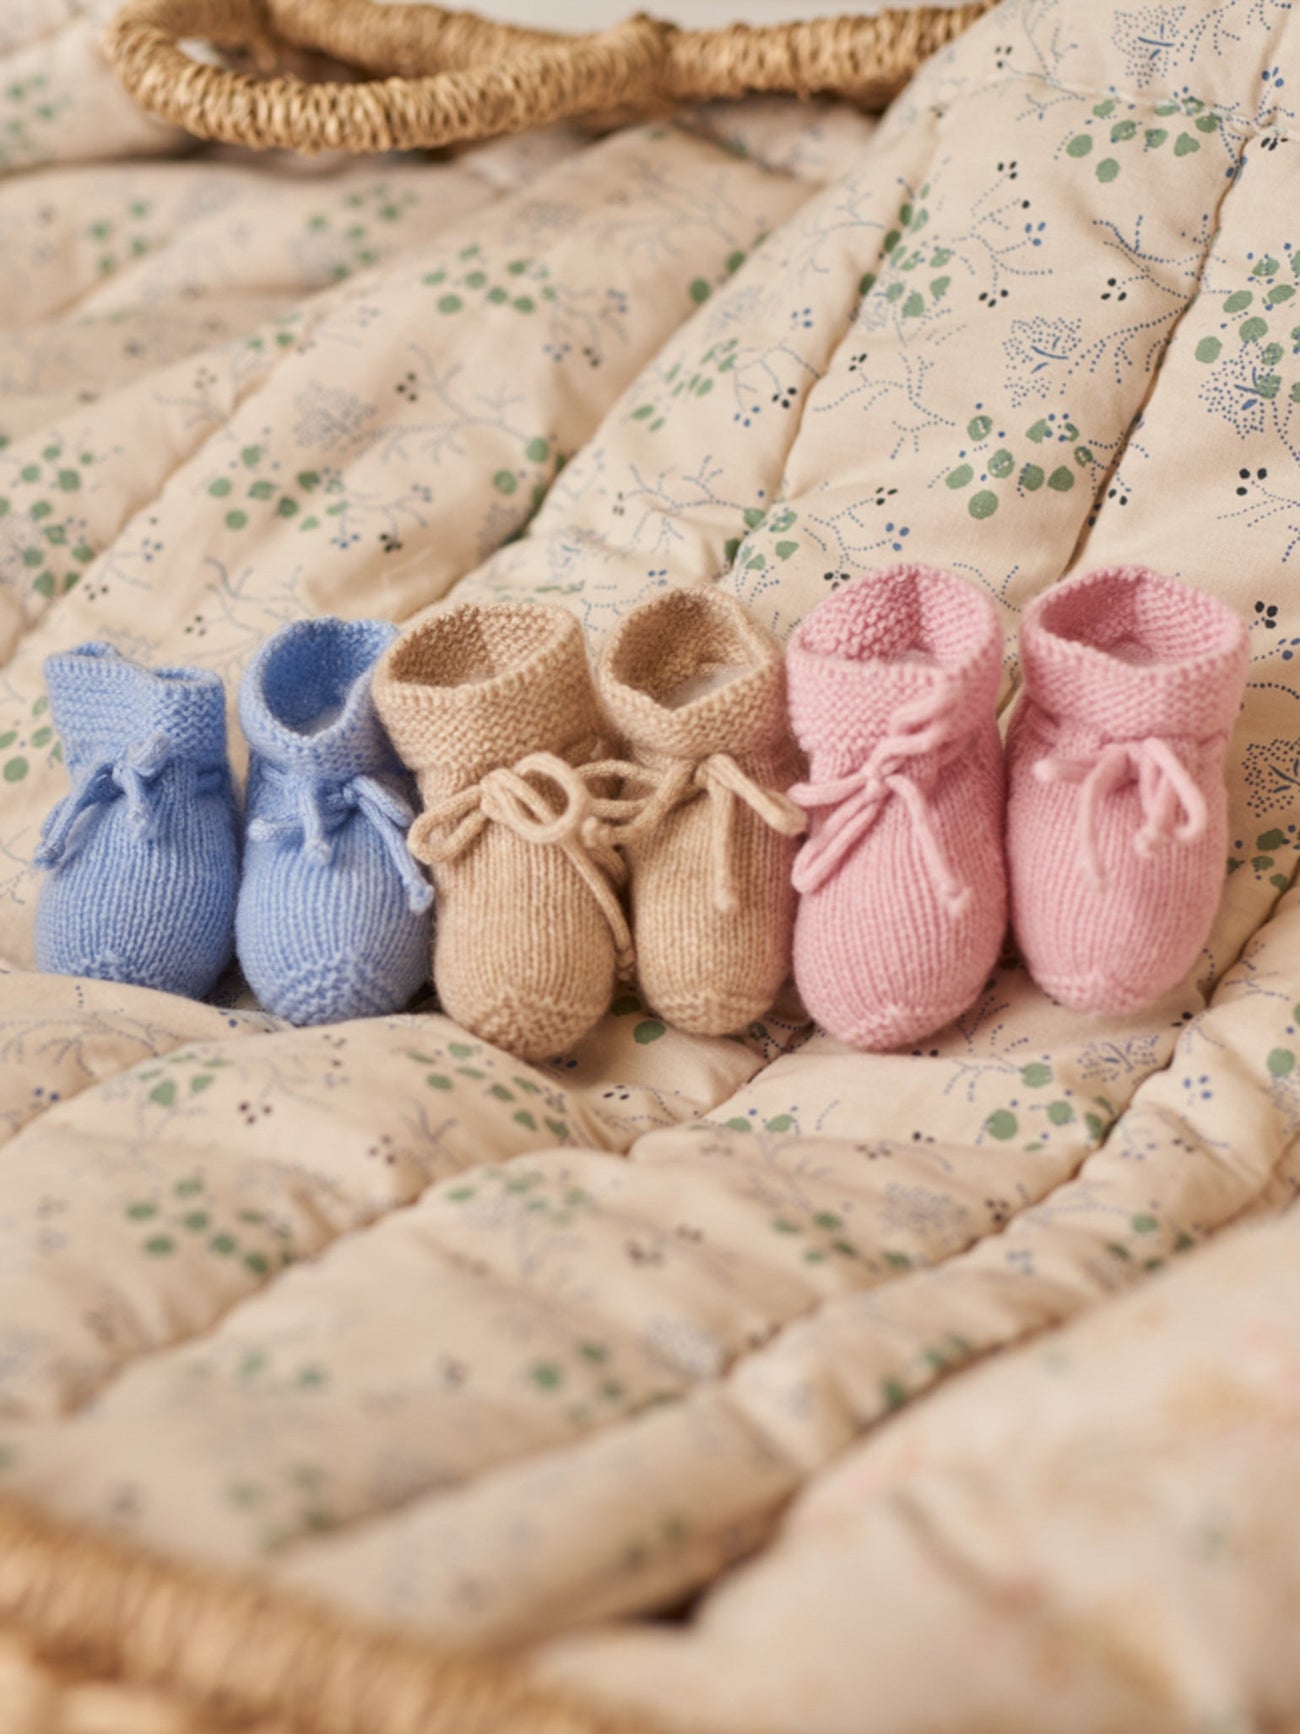 Dusty Pink Rimera Cashmere Baby Girl Booties